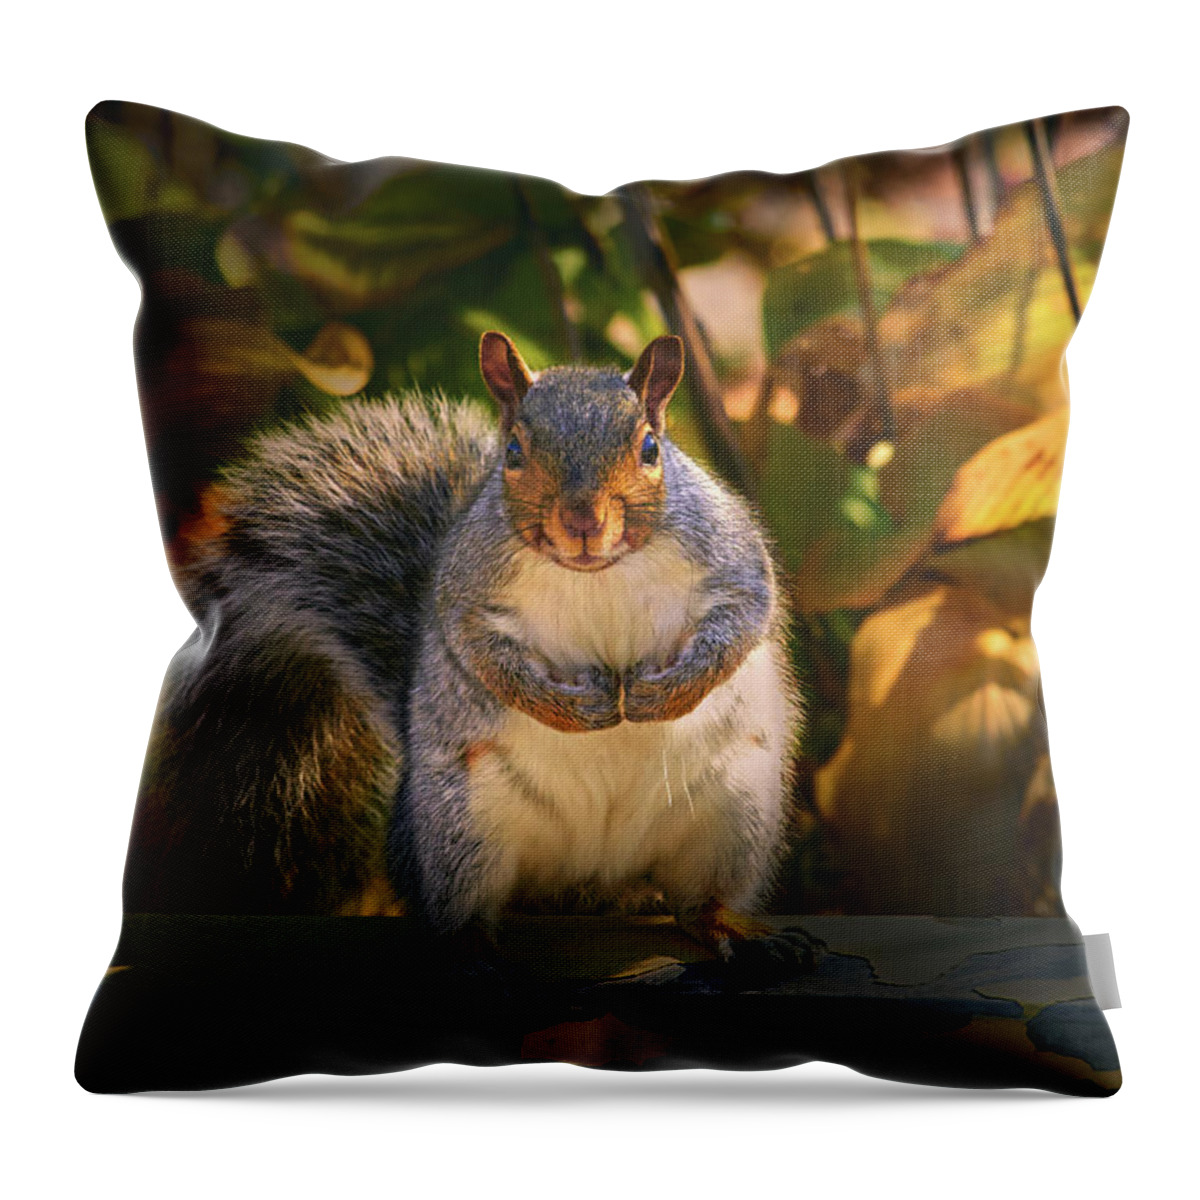 One Gray Squirrel Throw Pillow featuring the photograph One Gray Squirrel by Bob Orsillo